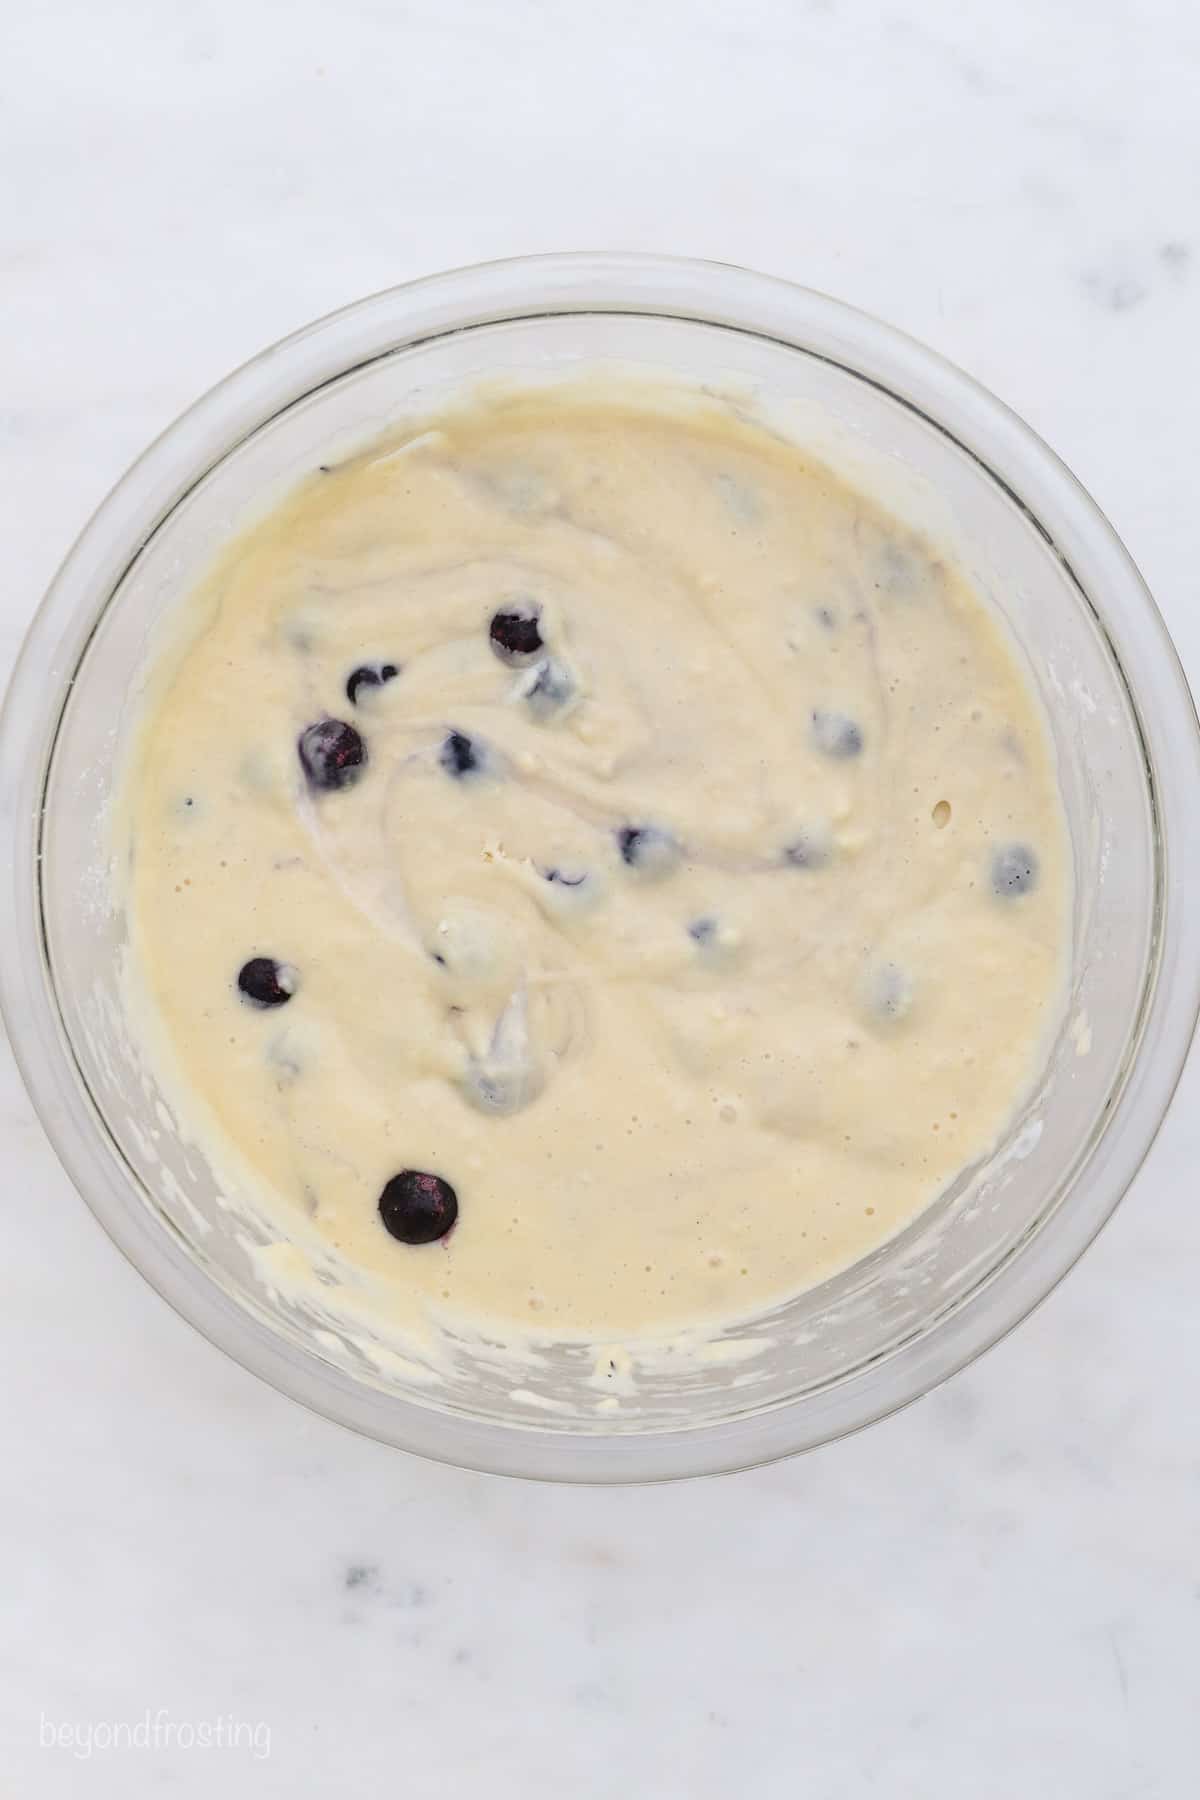 Blueberry muffin batter in a glass bowl.